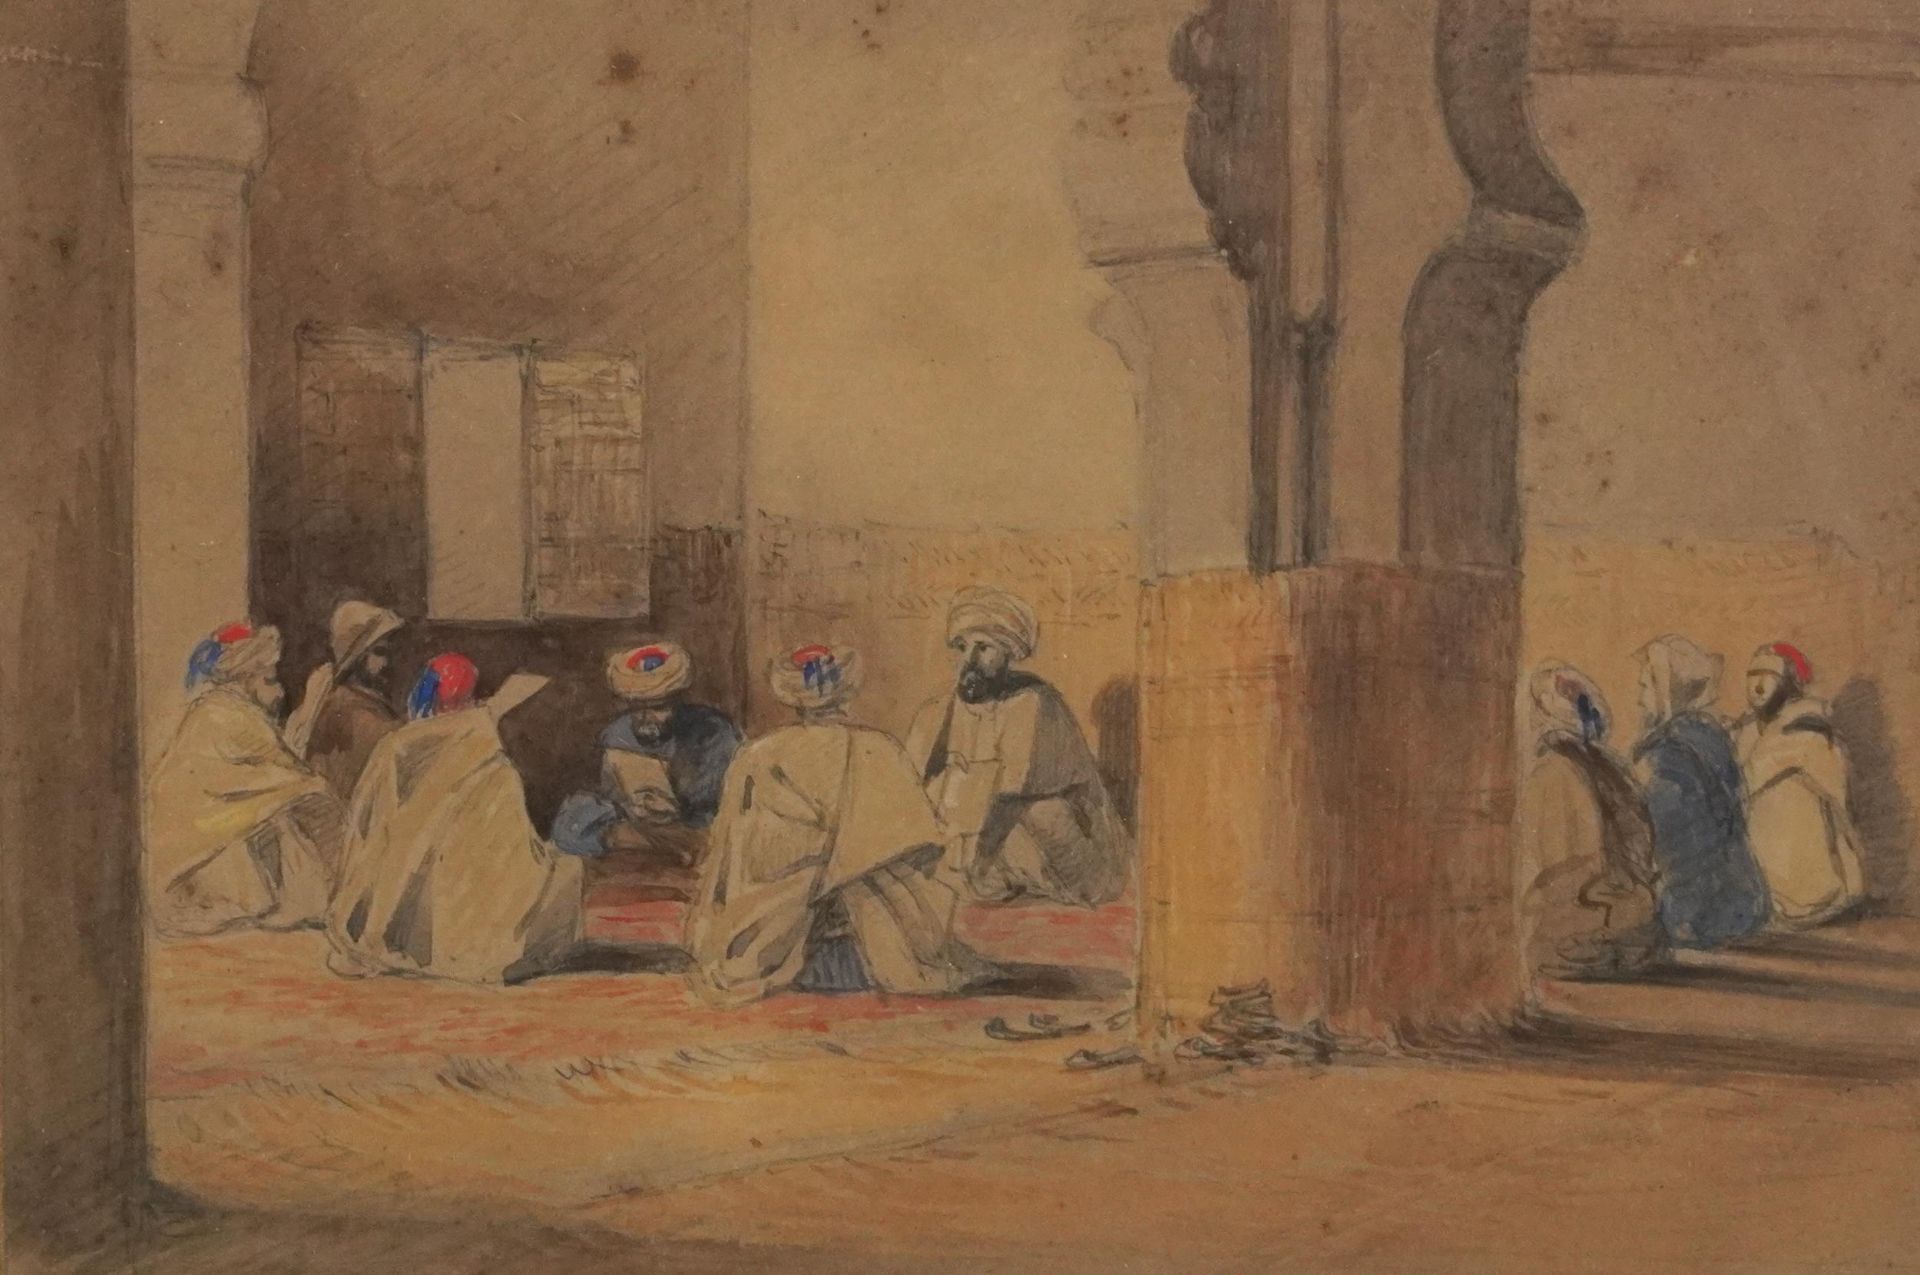 Arabs praying in an interior, Middle Eastern school watercolour, indistinctly inscribed in pencil to